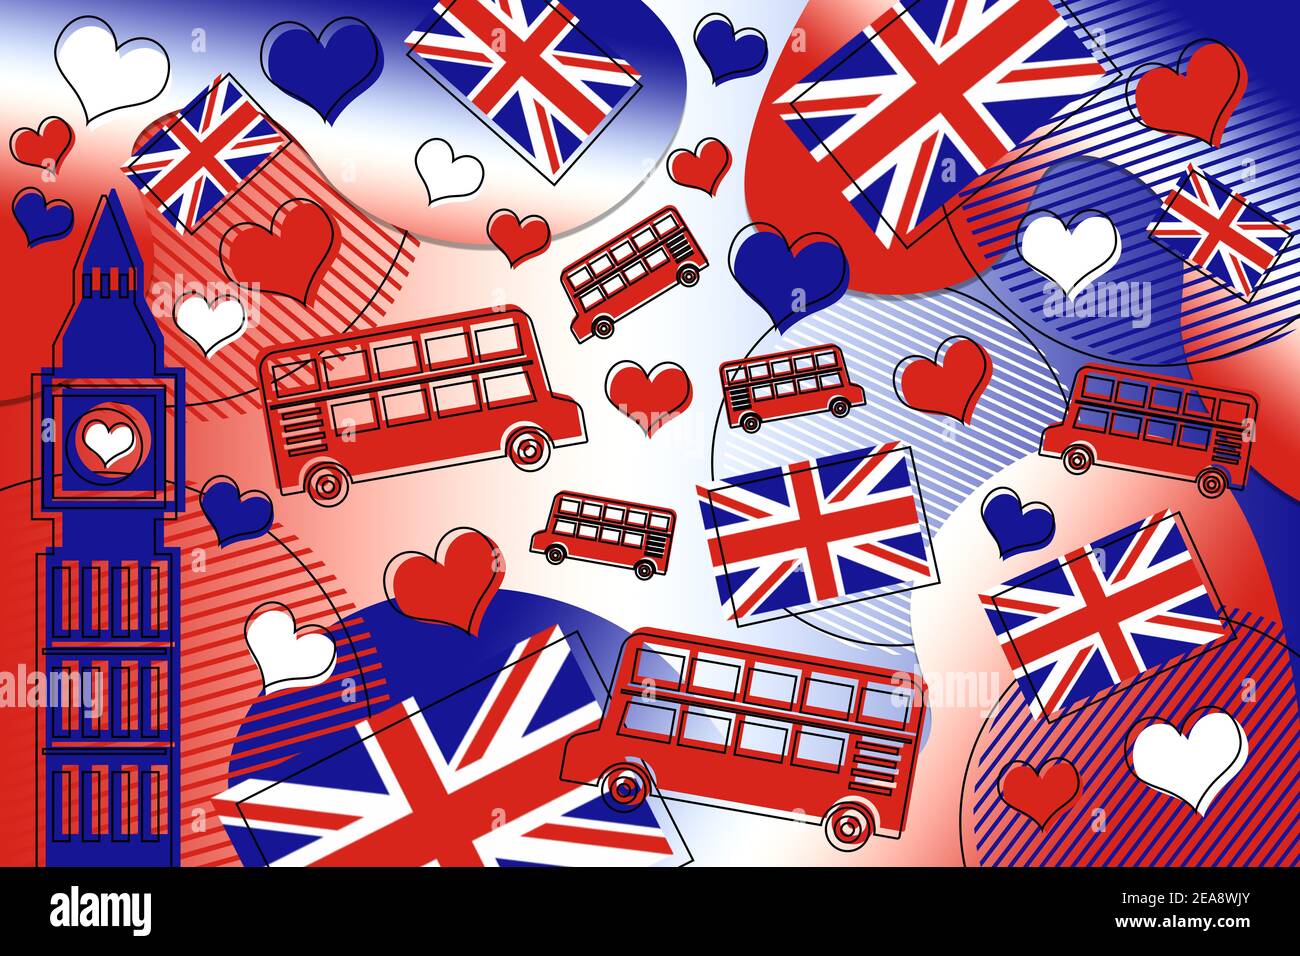 Memphis style background illustration of London, UK with big ben, Union Jack flag and double decker bus in red, white and blue colors. Stock Photo